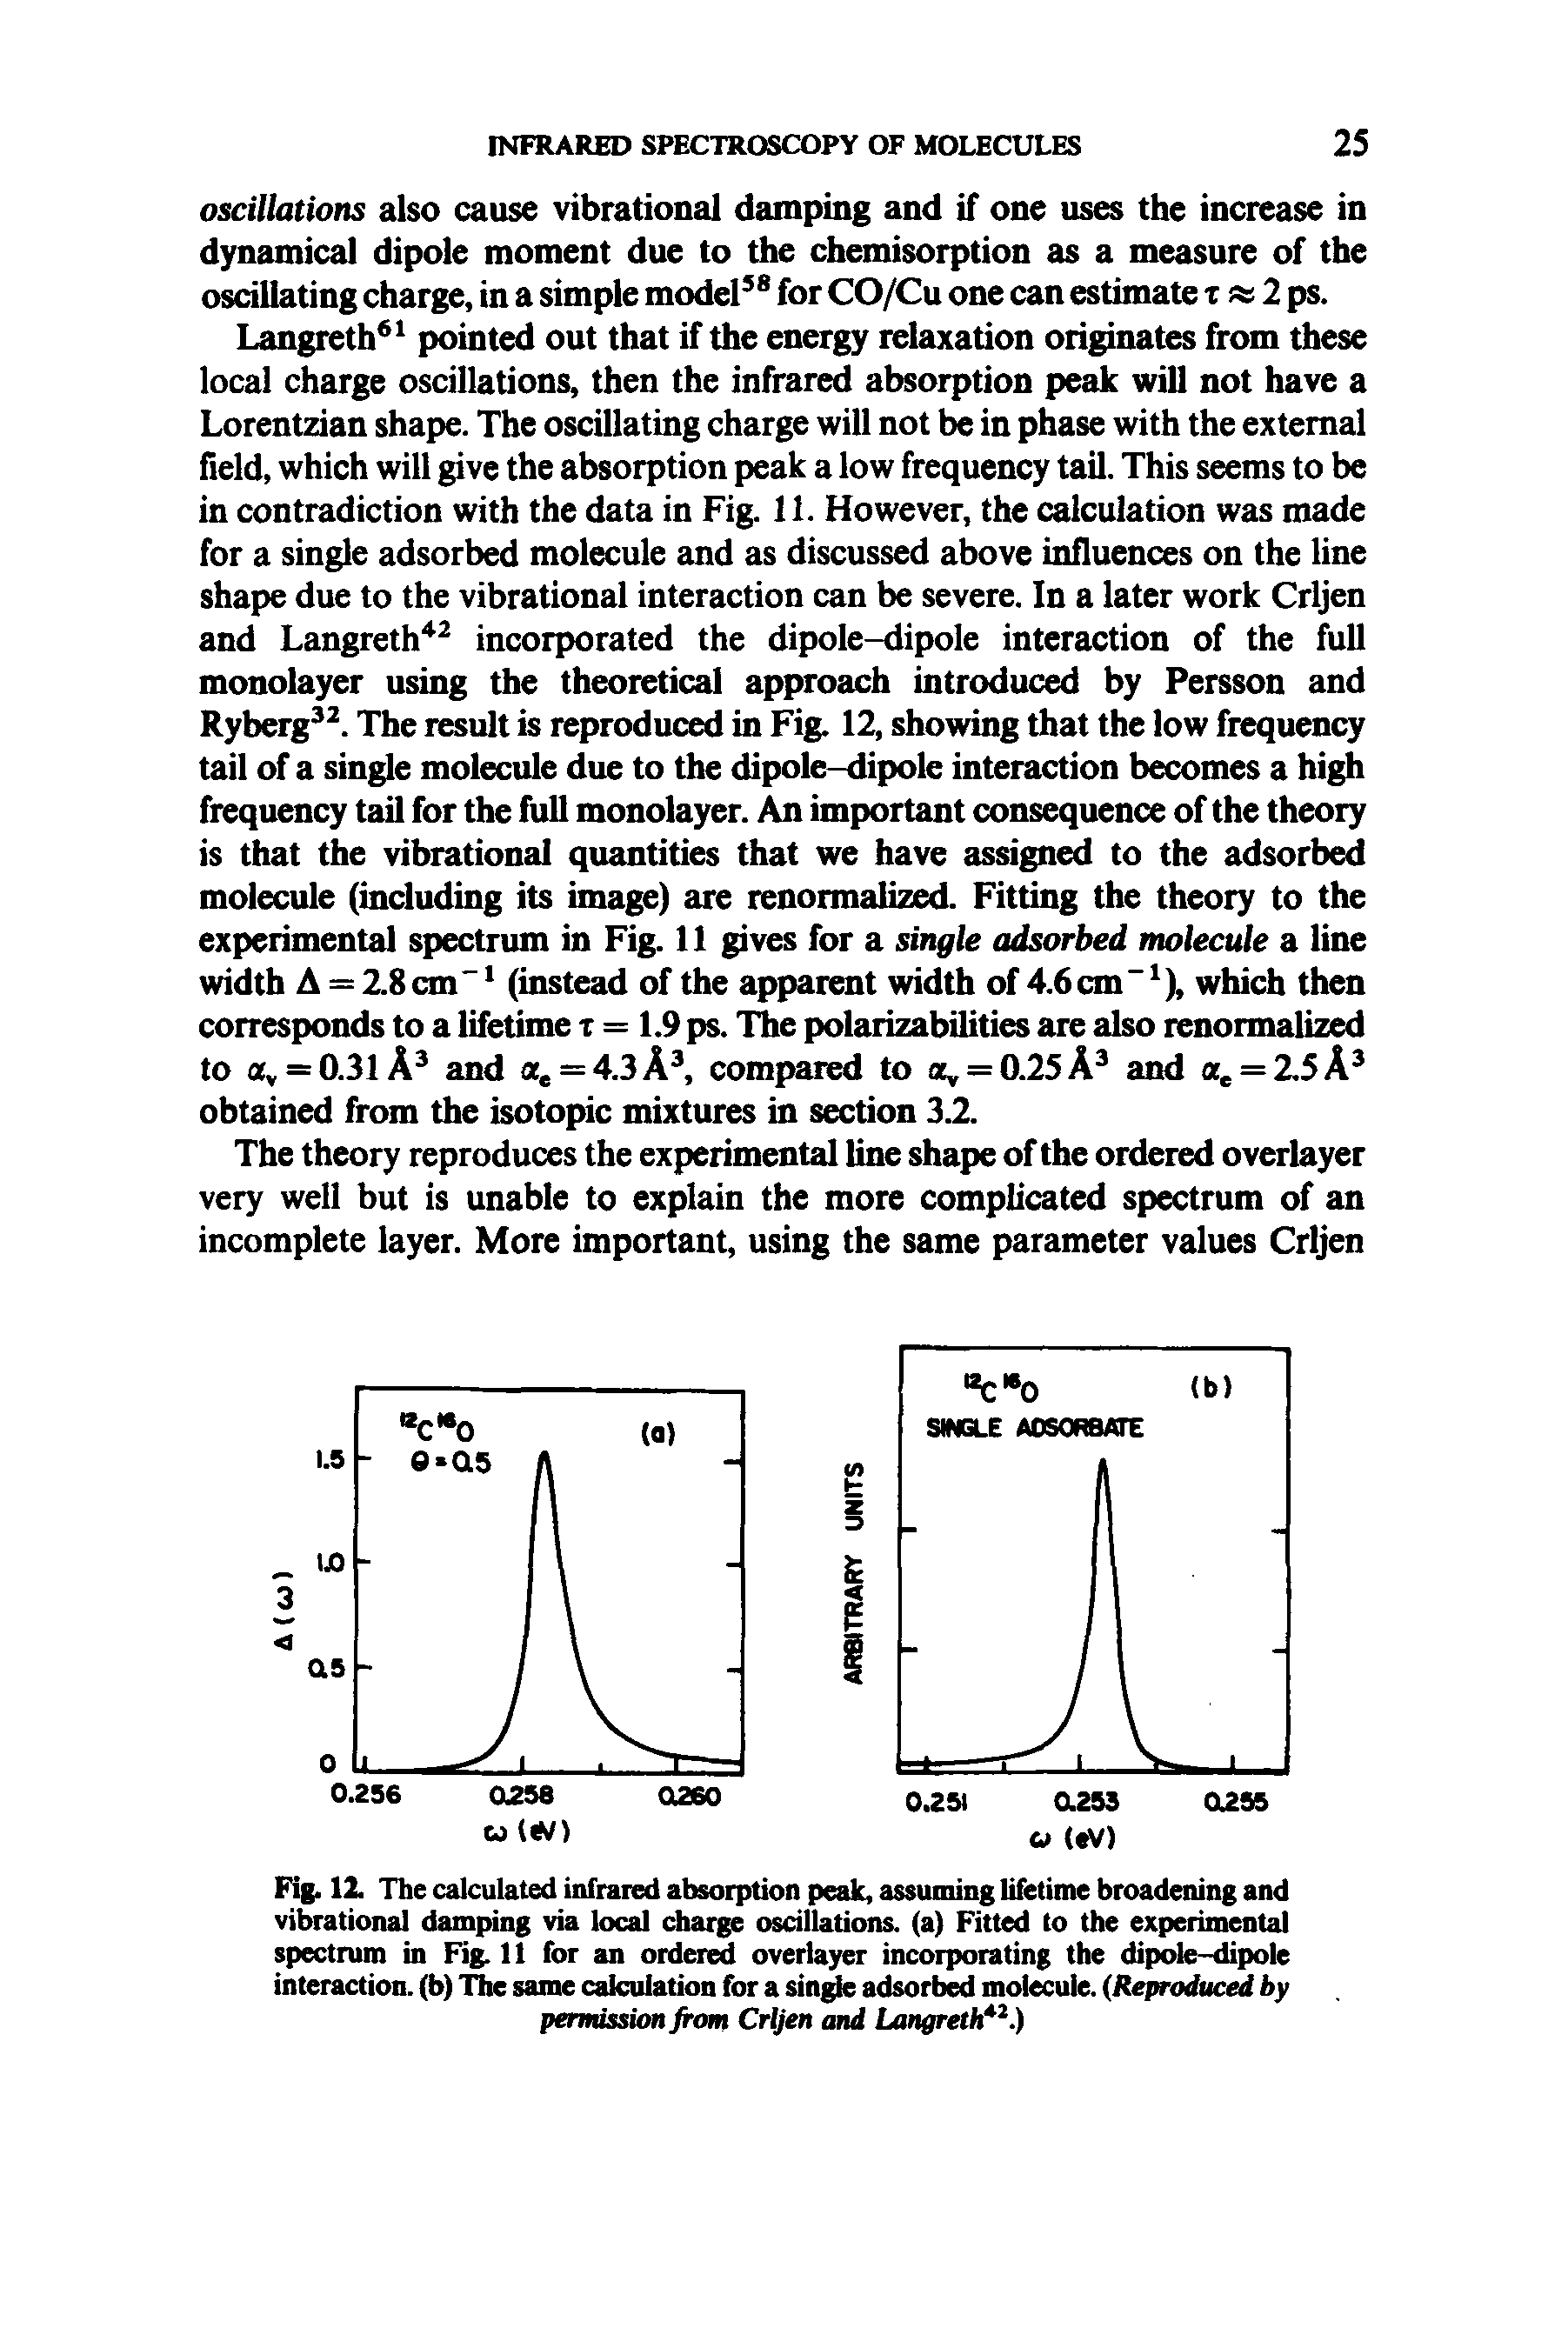 Fig. IX The calculated infrared absorption peak, assuming lifetime broadening and vibrational damping via local charge oscillations, (a) Fitted to the experimental spectrum in Fig. 11 for an ordered overlayer incorporating the dipole-dipole interaction, (b) The same calculation for a single adsorb molecule. (Reproduced by poTtassUm from Crljen and Langreth. )...